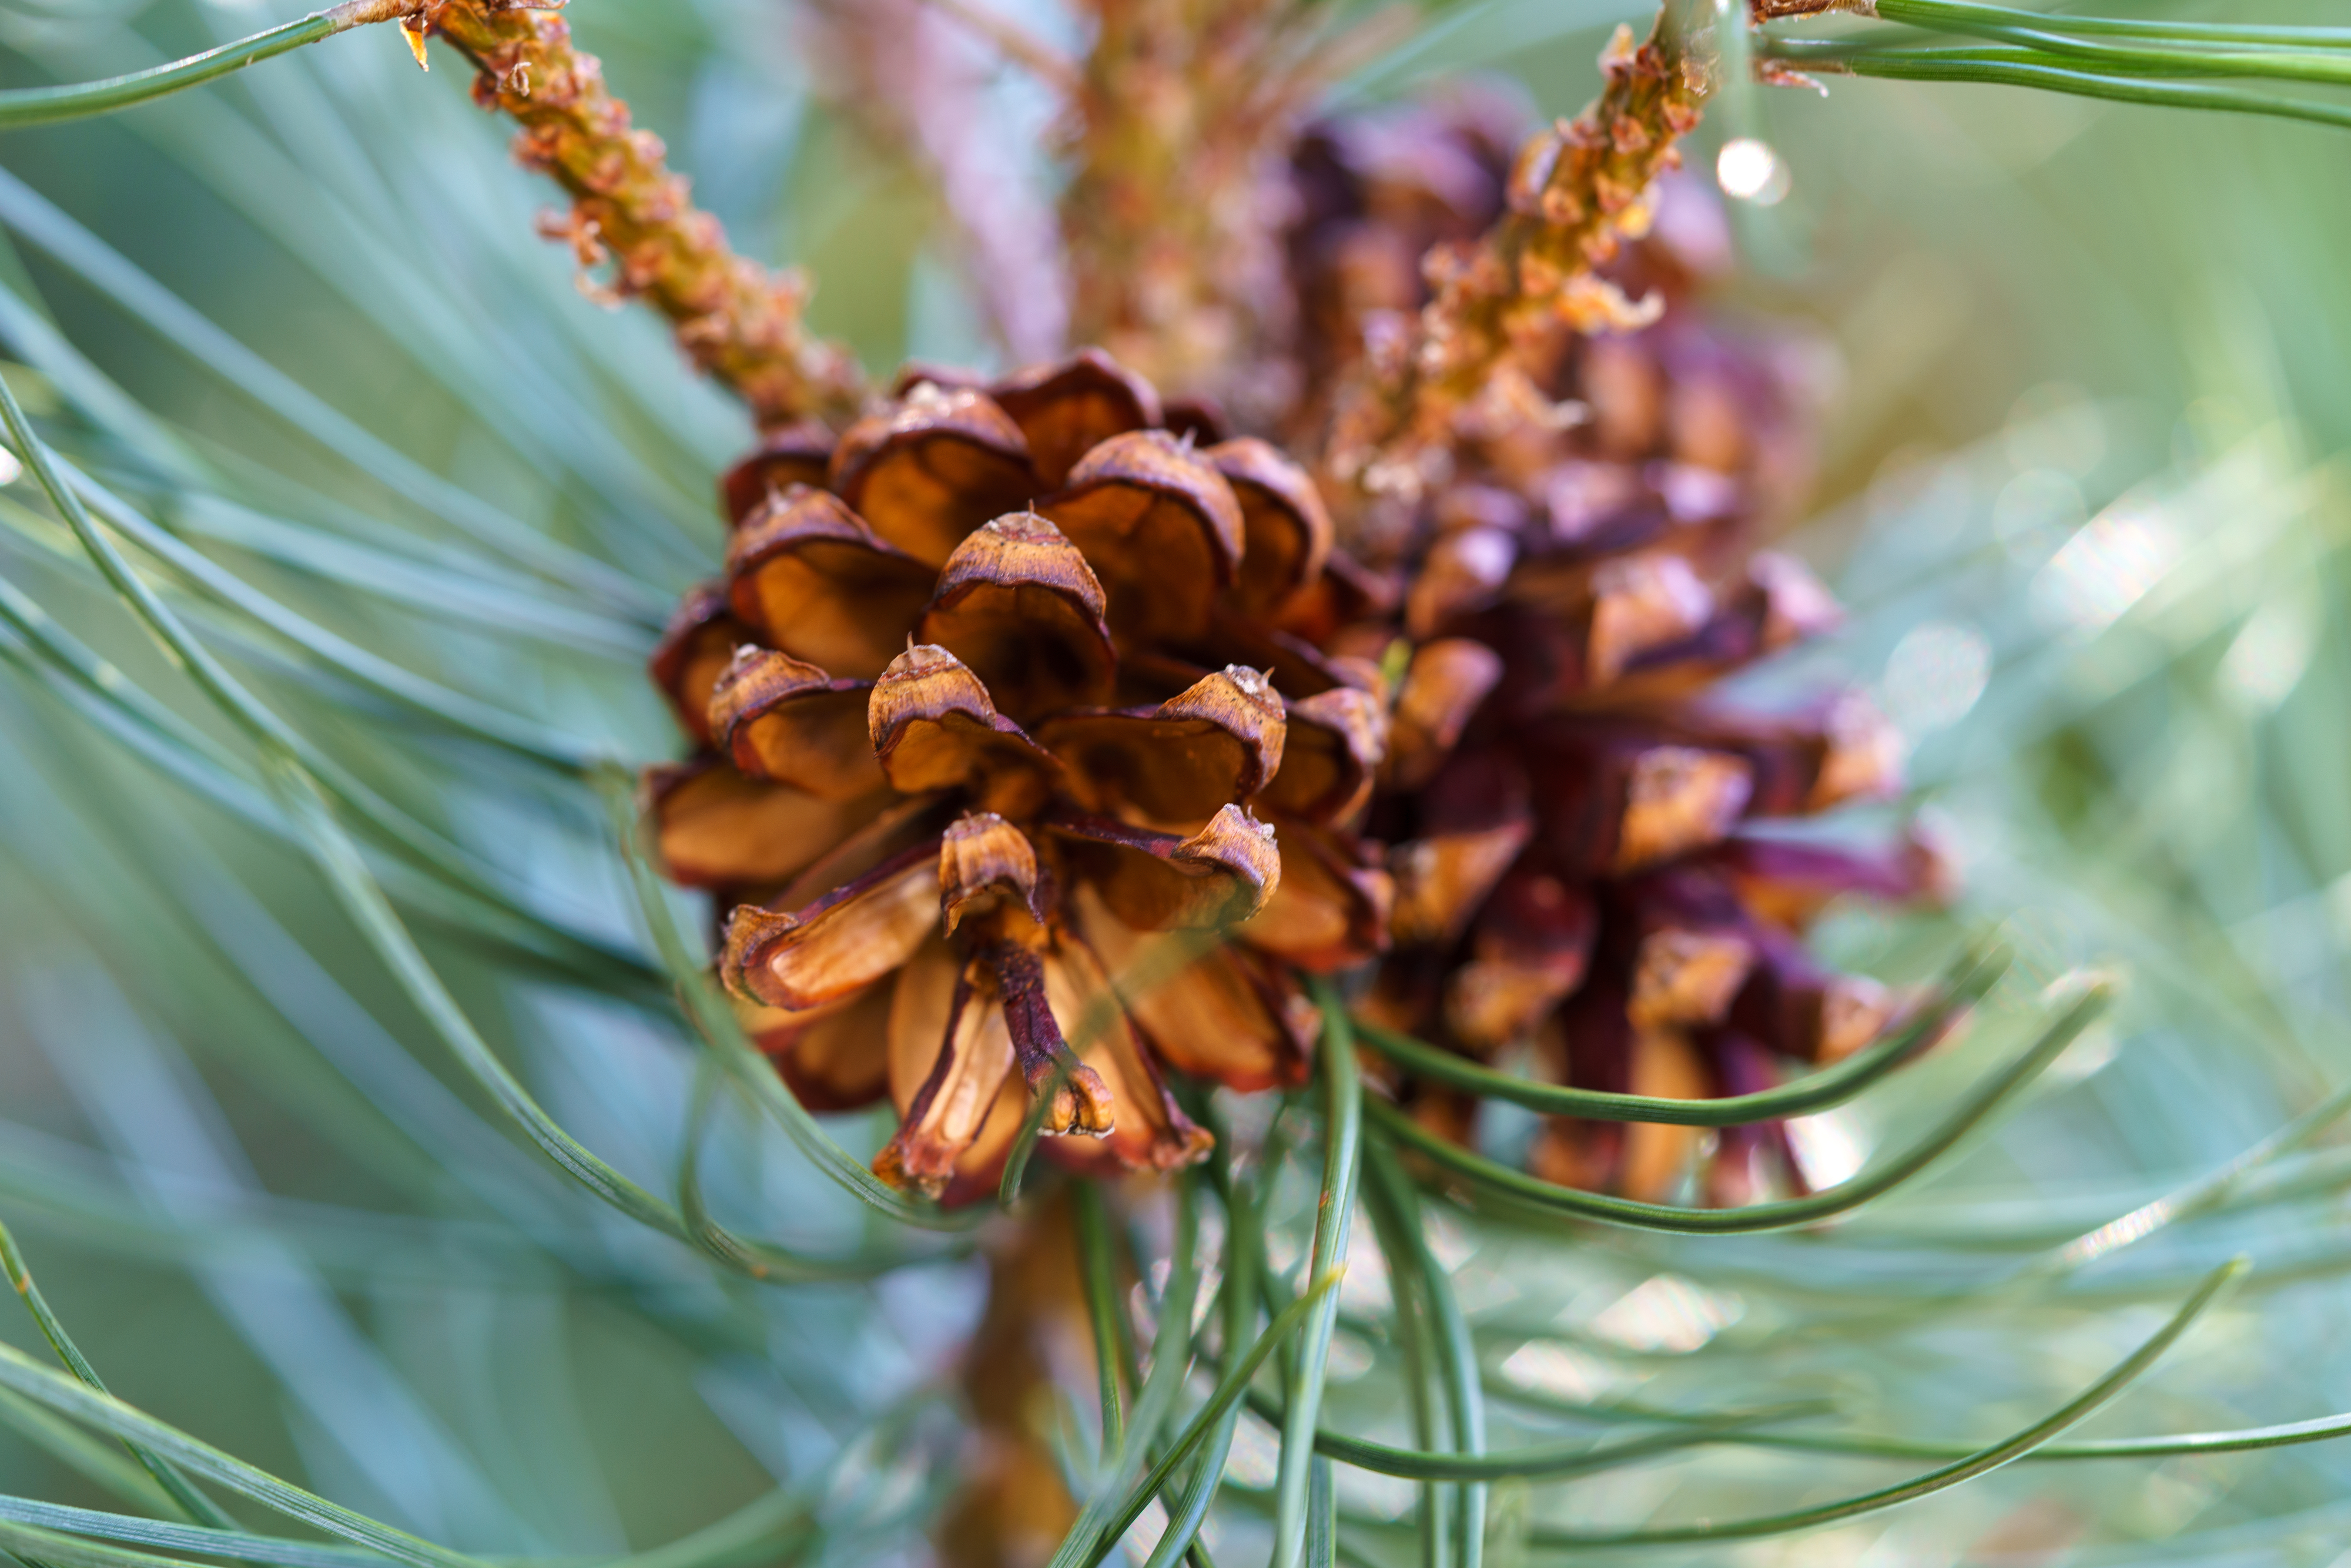 Close-up of a pine cone amid green needles, typical flora one might encounter while traveling in coniferous forests